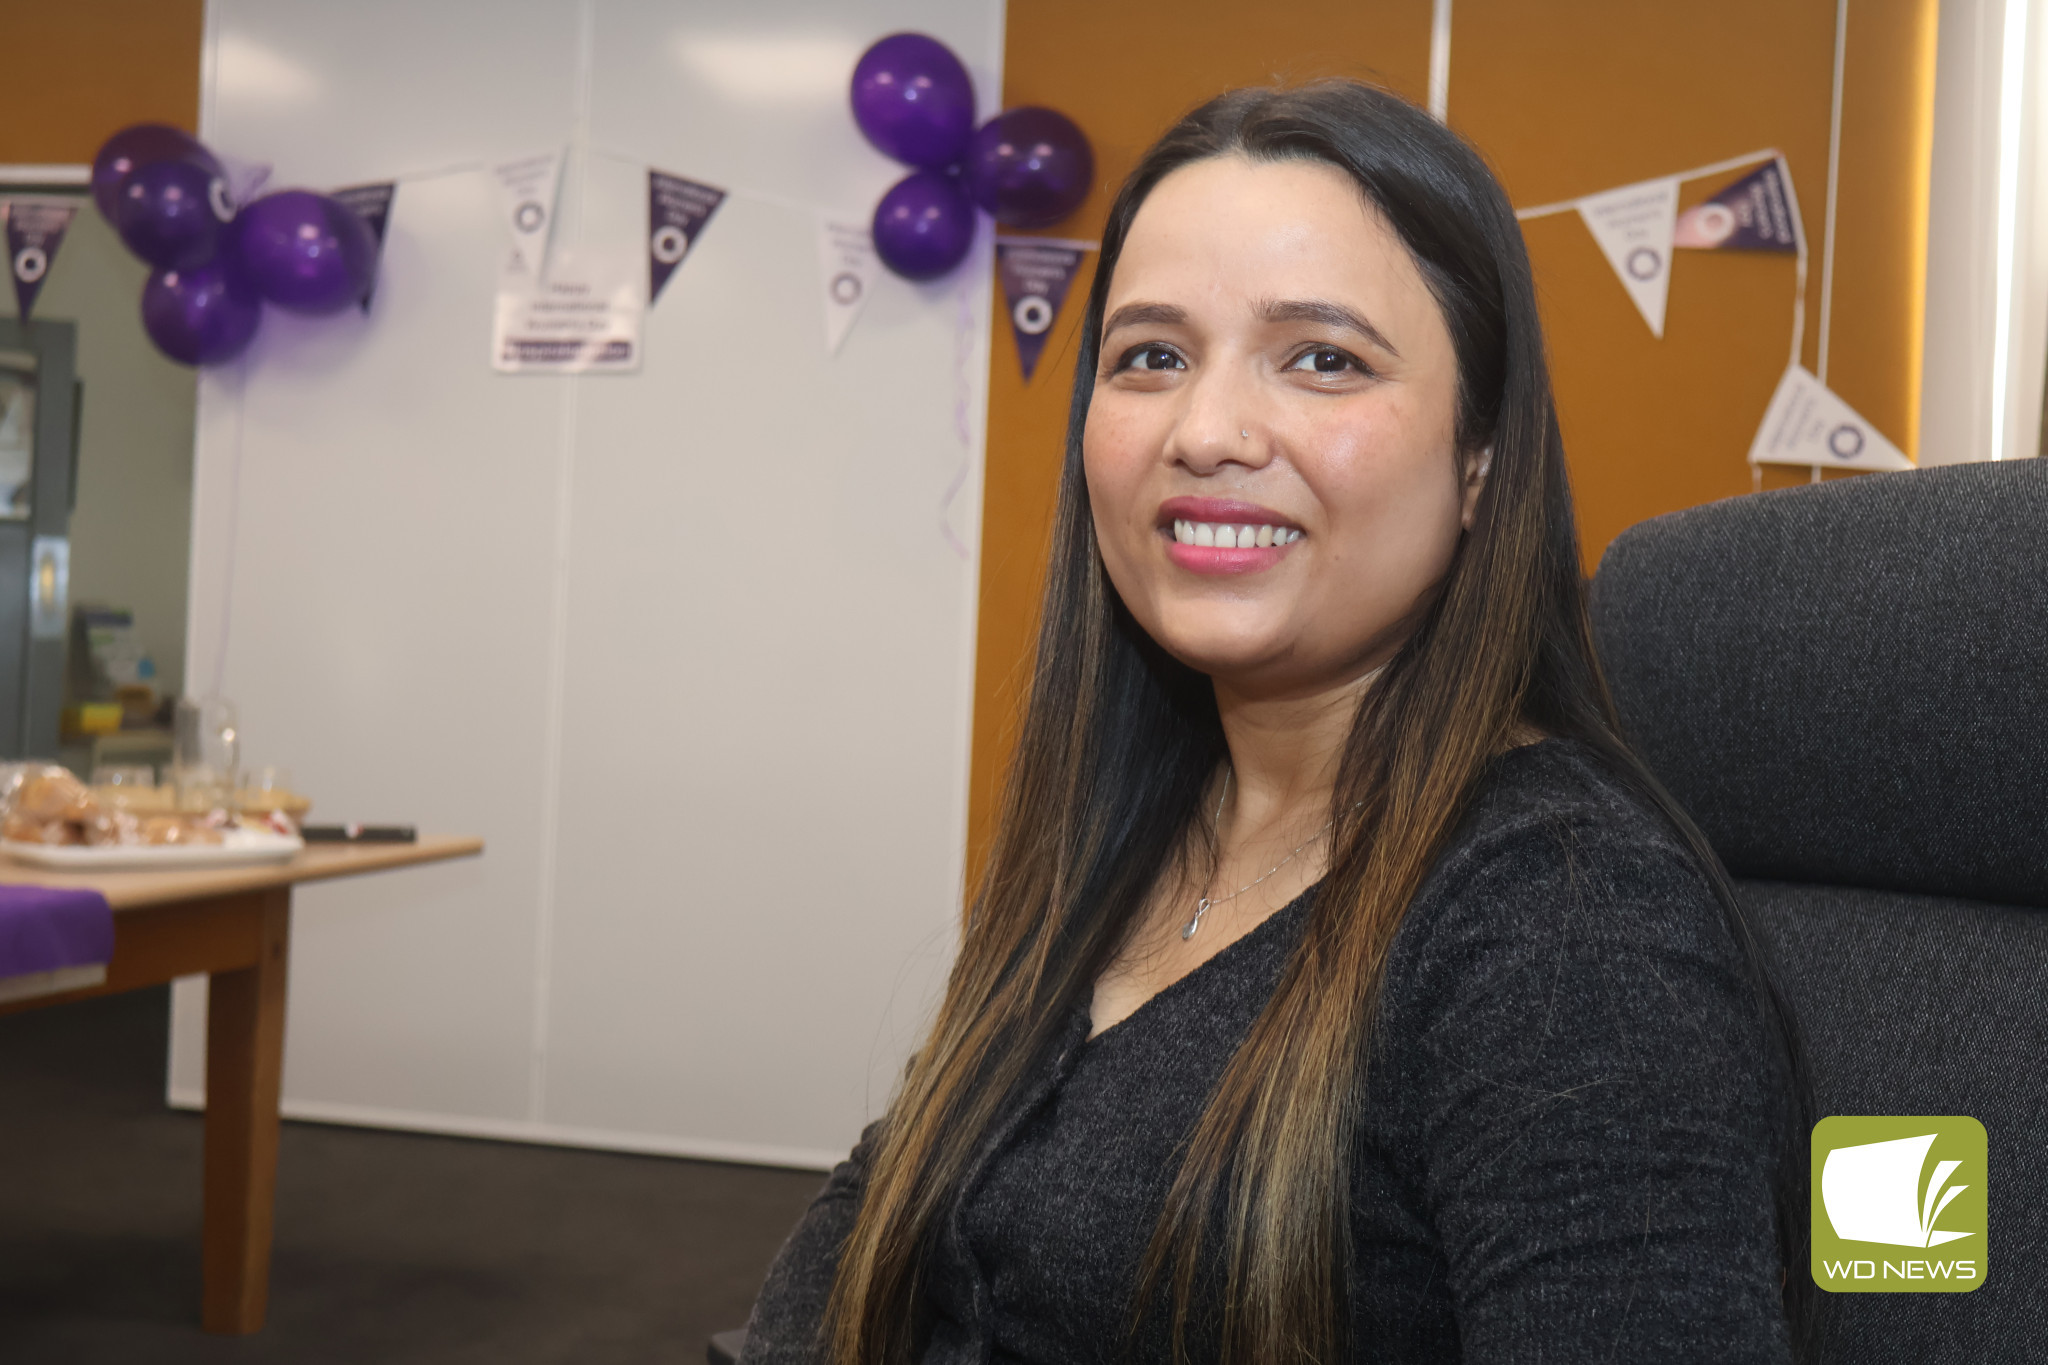 Dedicated: Terang and Mortlake Health Service nurse Meena Neupane shared the story of her path to professional success at a special breakfast as part of International Women’s Day last Friday.